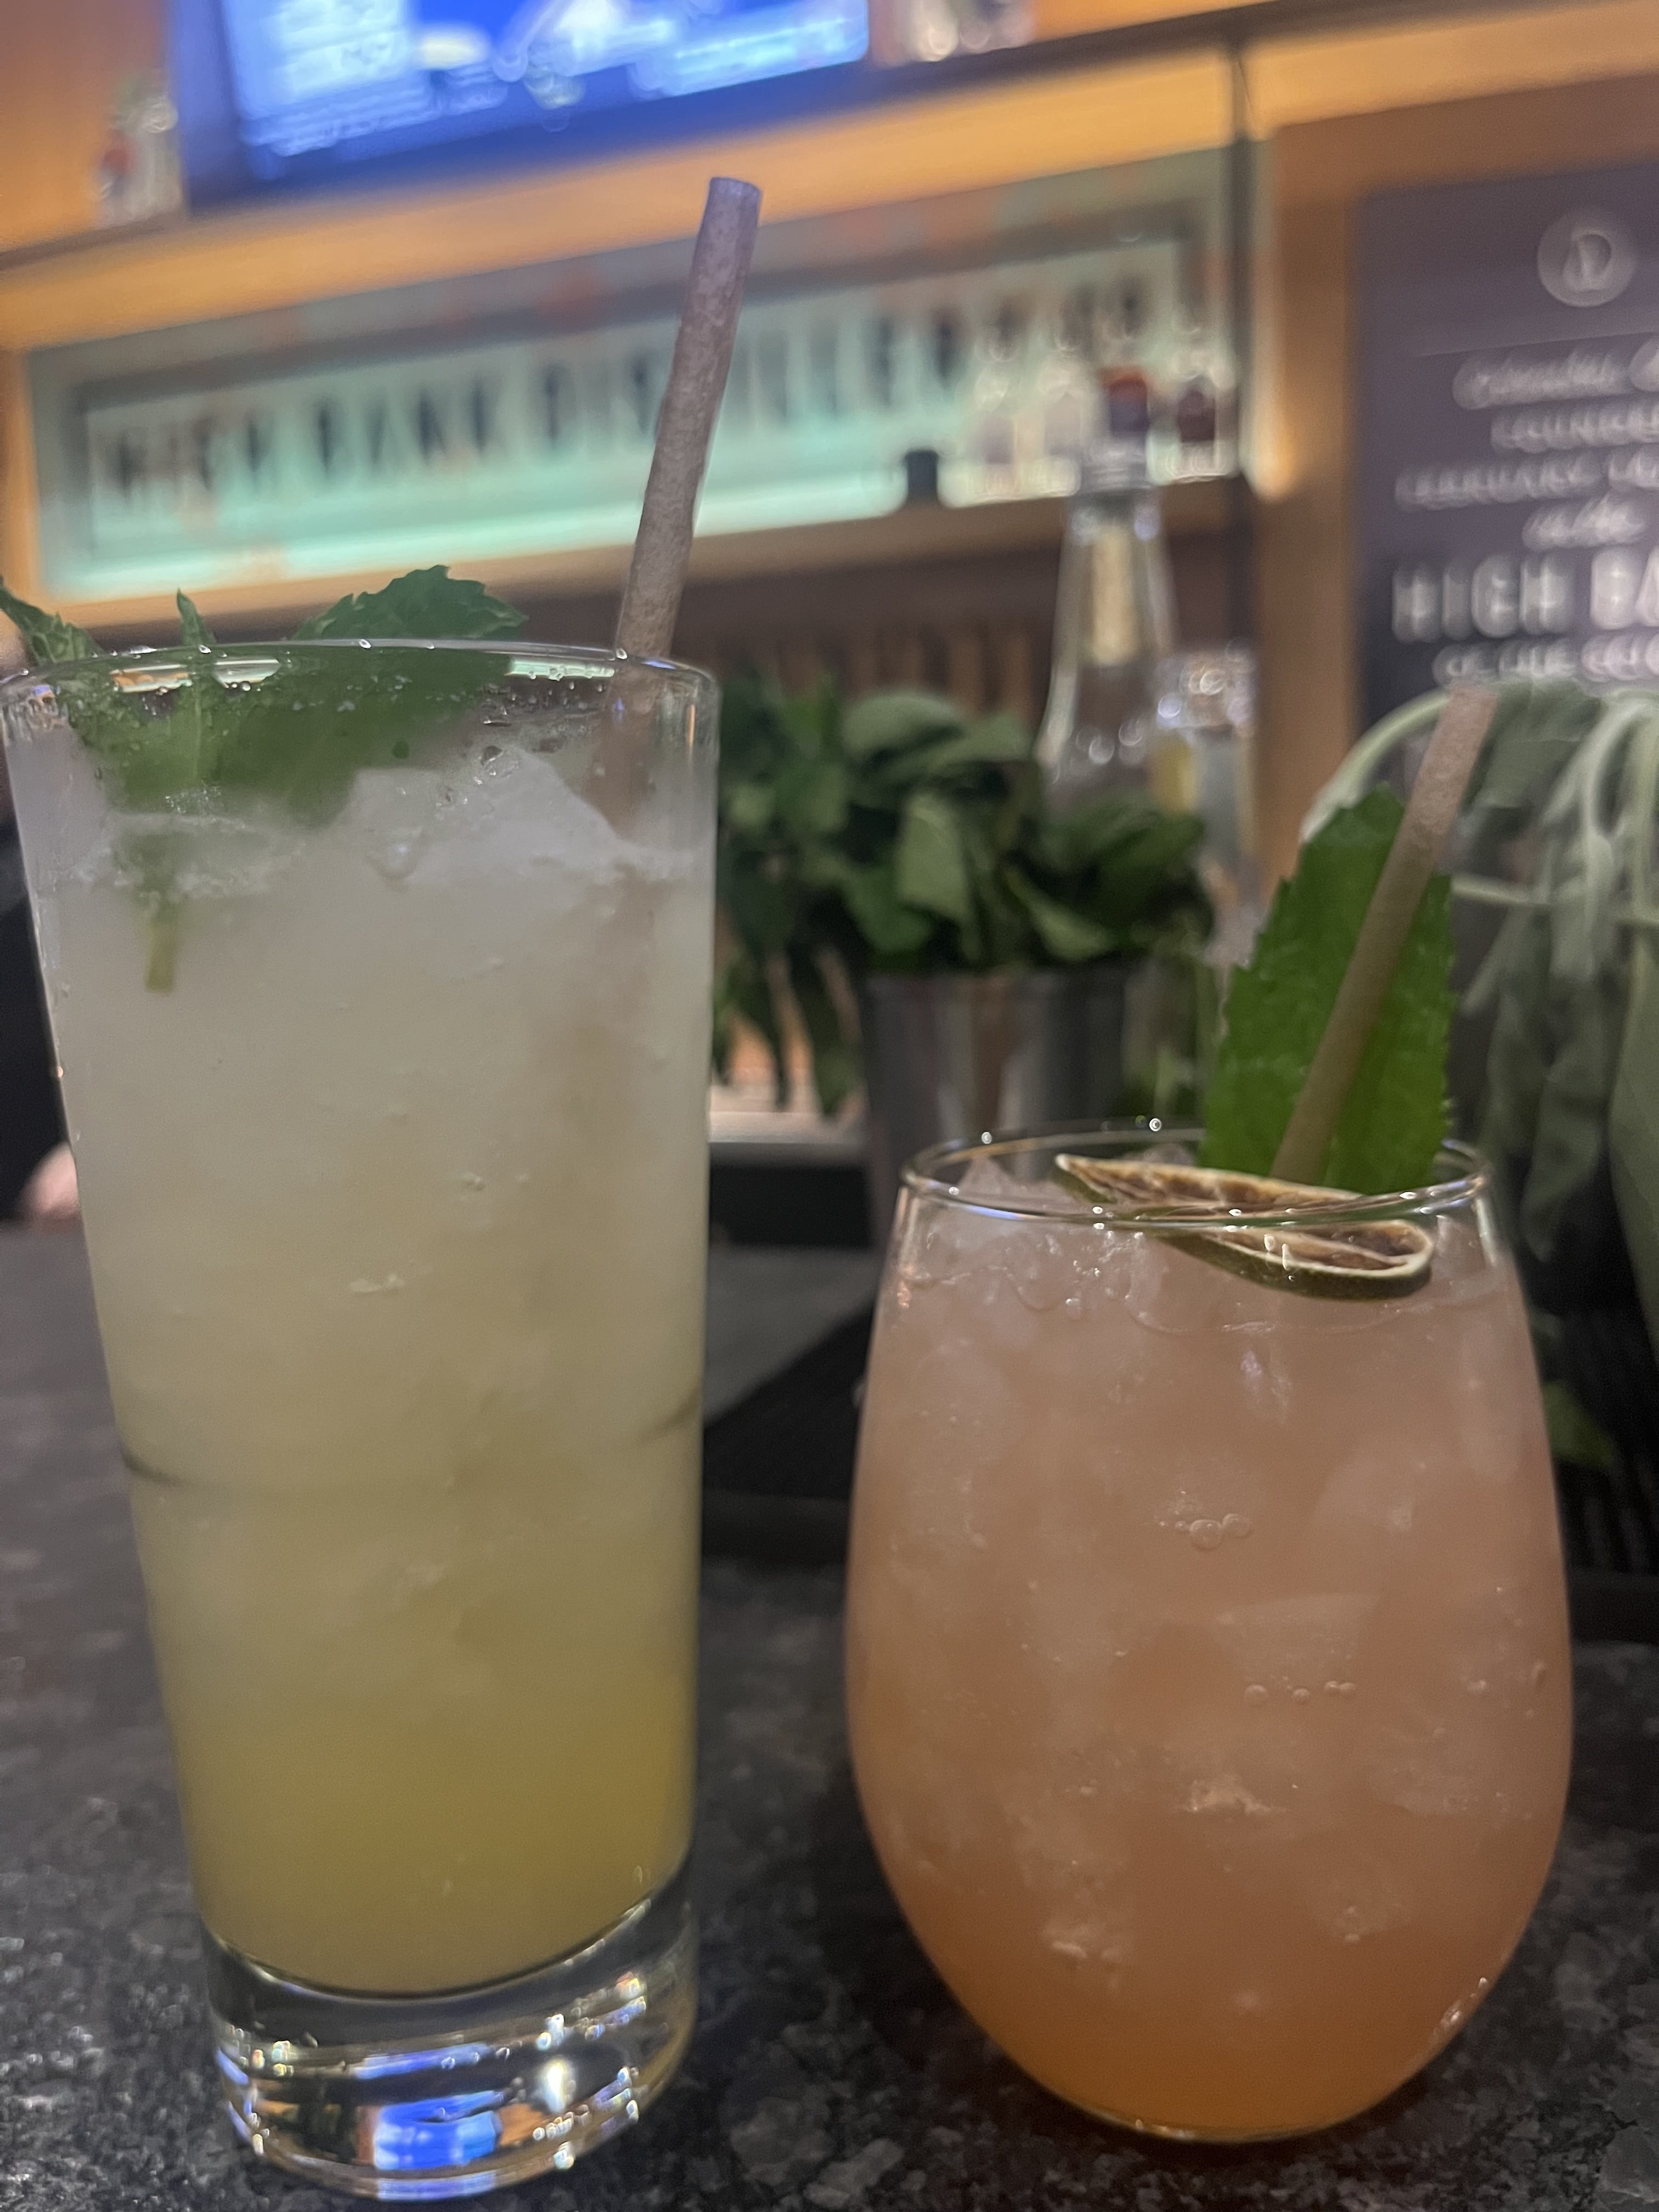 High Bank Distillery's “Apri-caught You Lookin” (left) and "Rosé Cooler” (right) combine house vodka with delicious fruity flavors. Credit: Kate Shields | Campus Editor